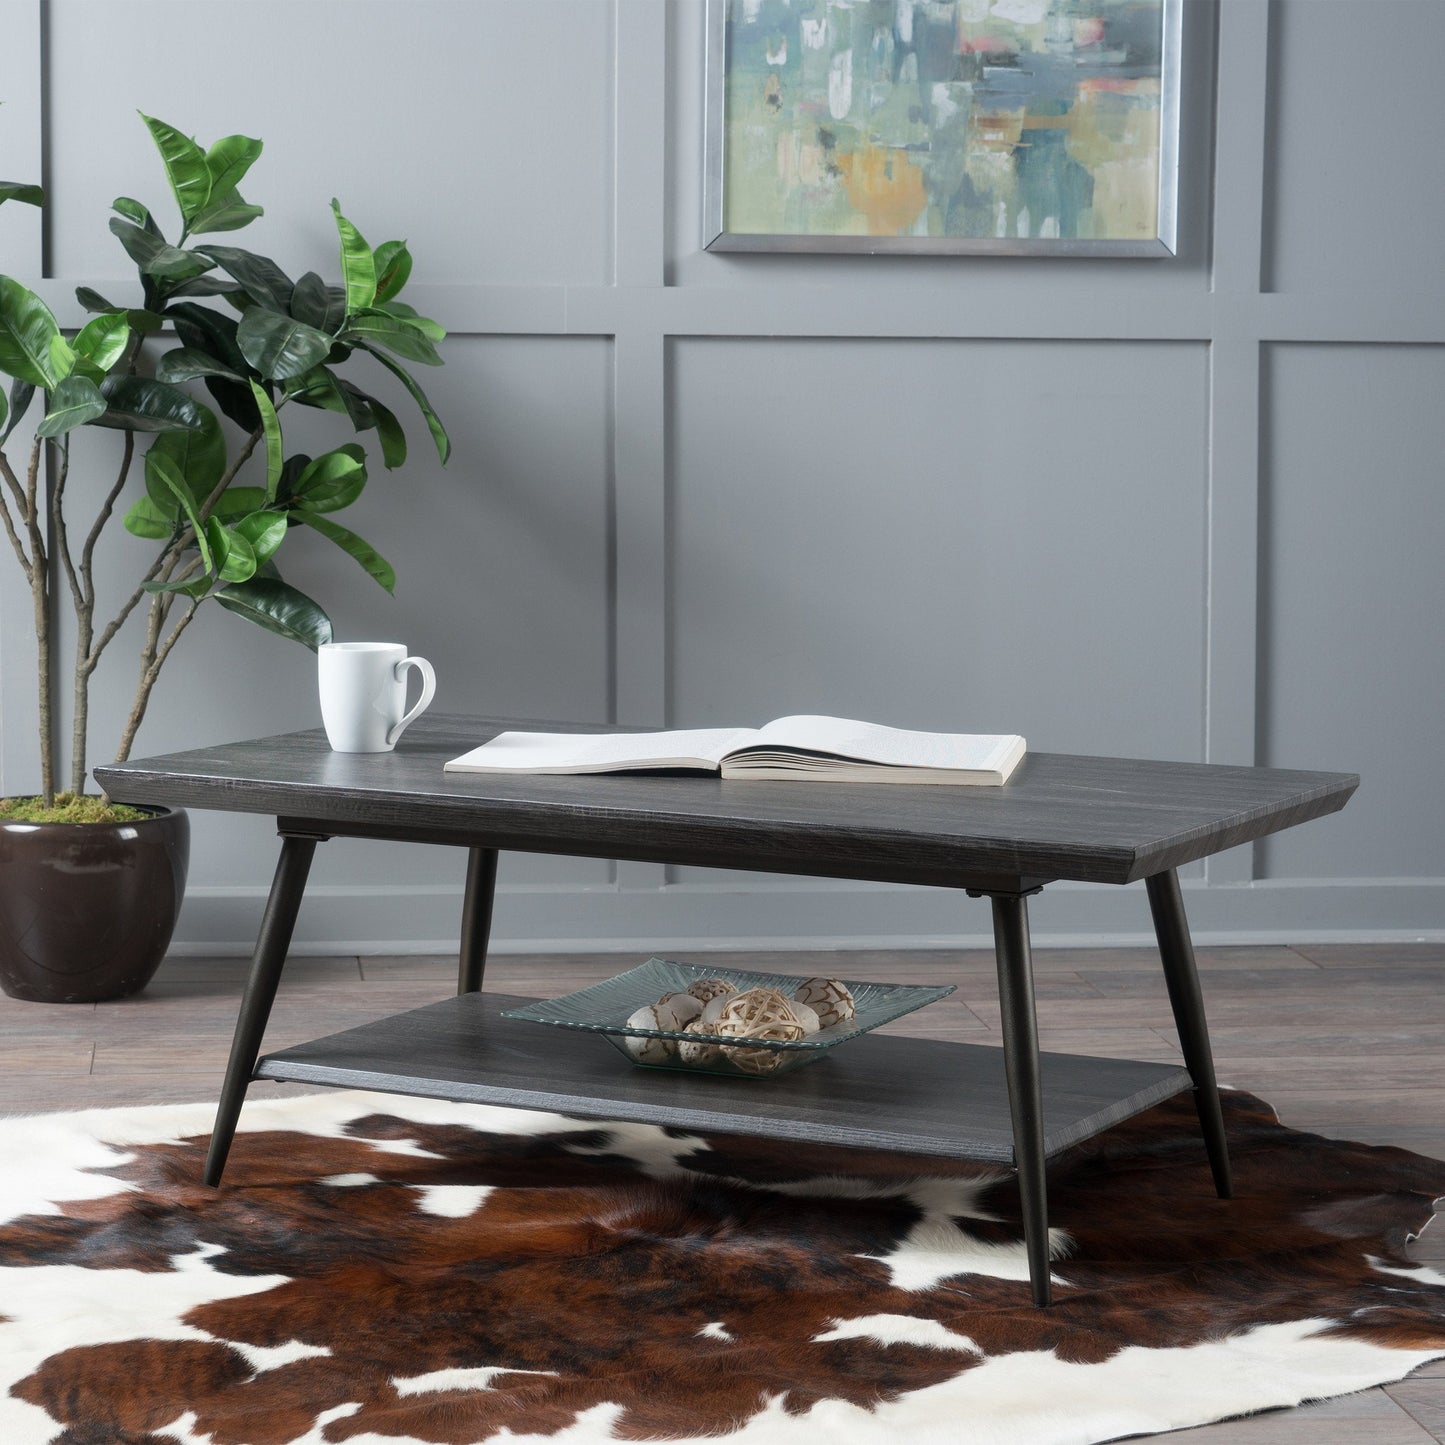 Ditmas Quality Crafted Wood Finish Coffee Table